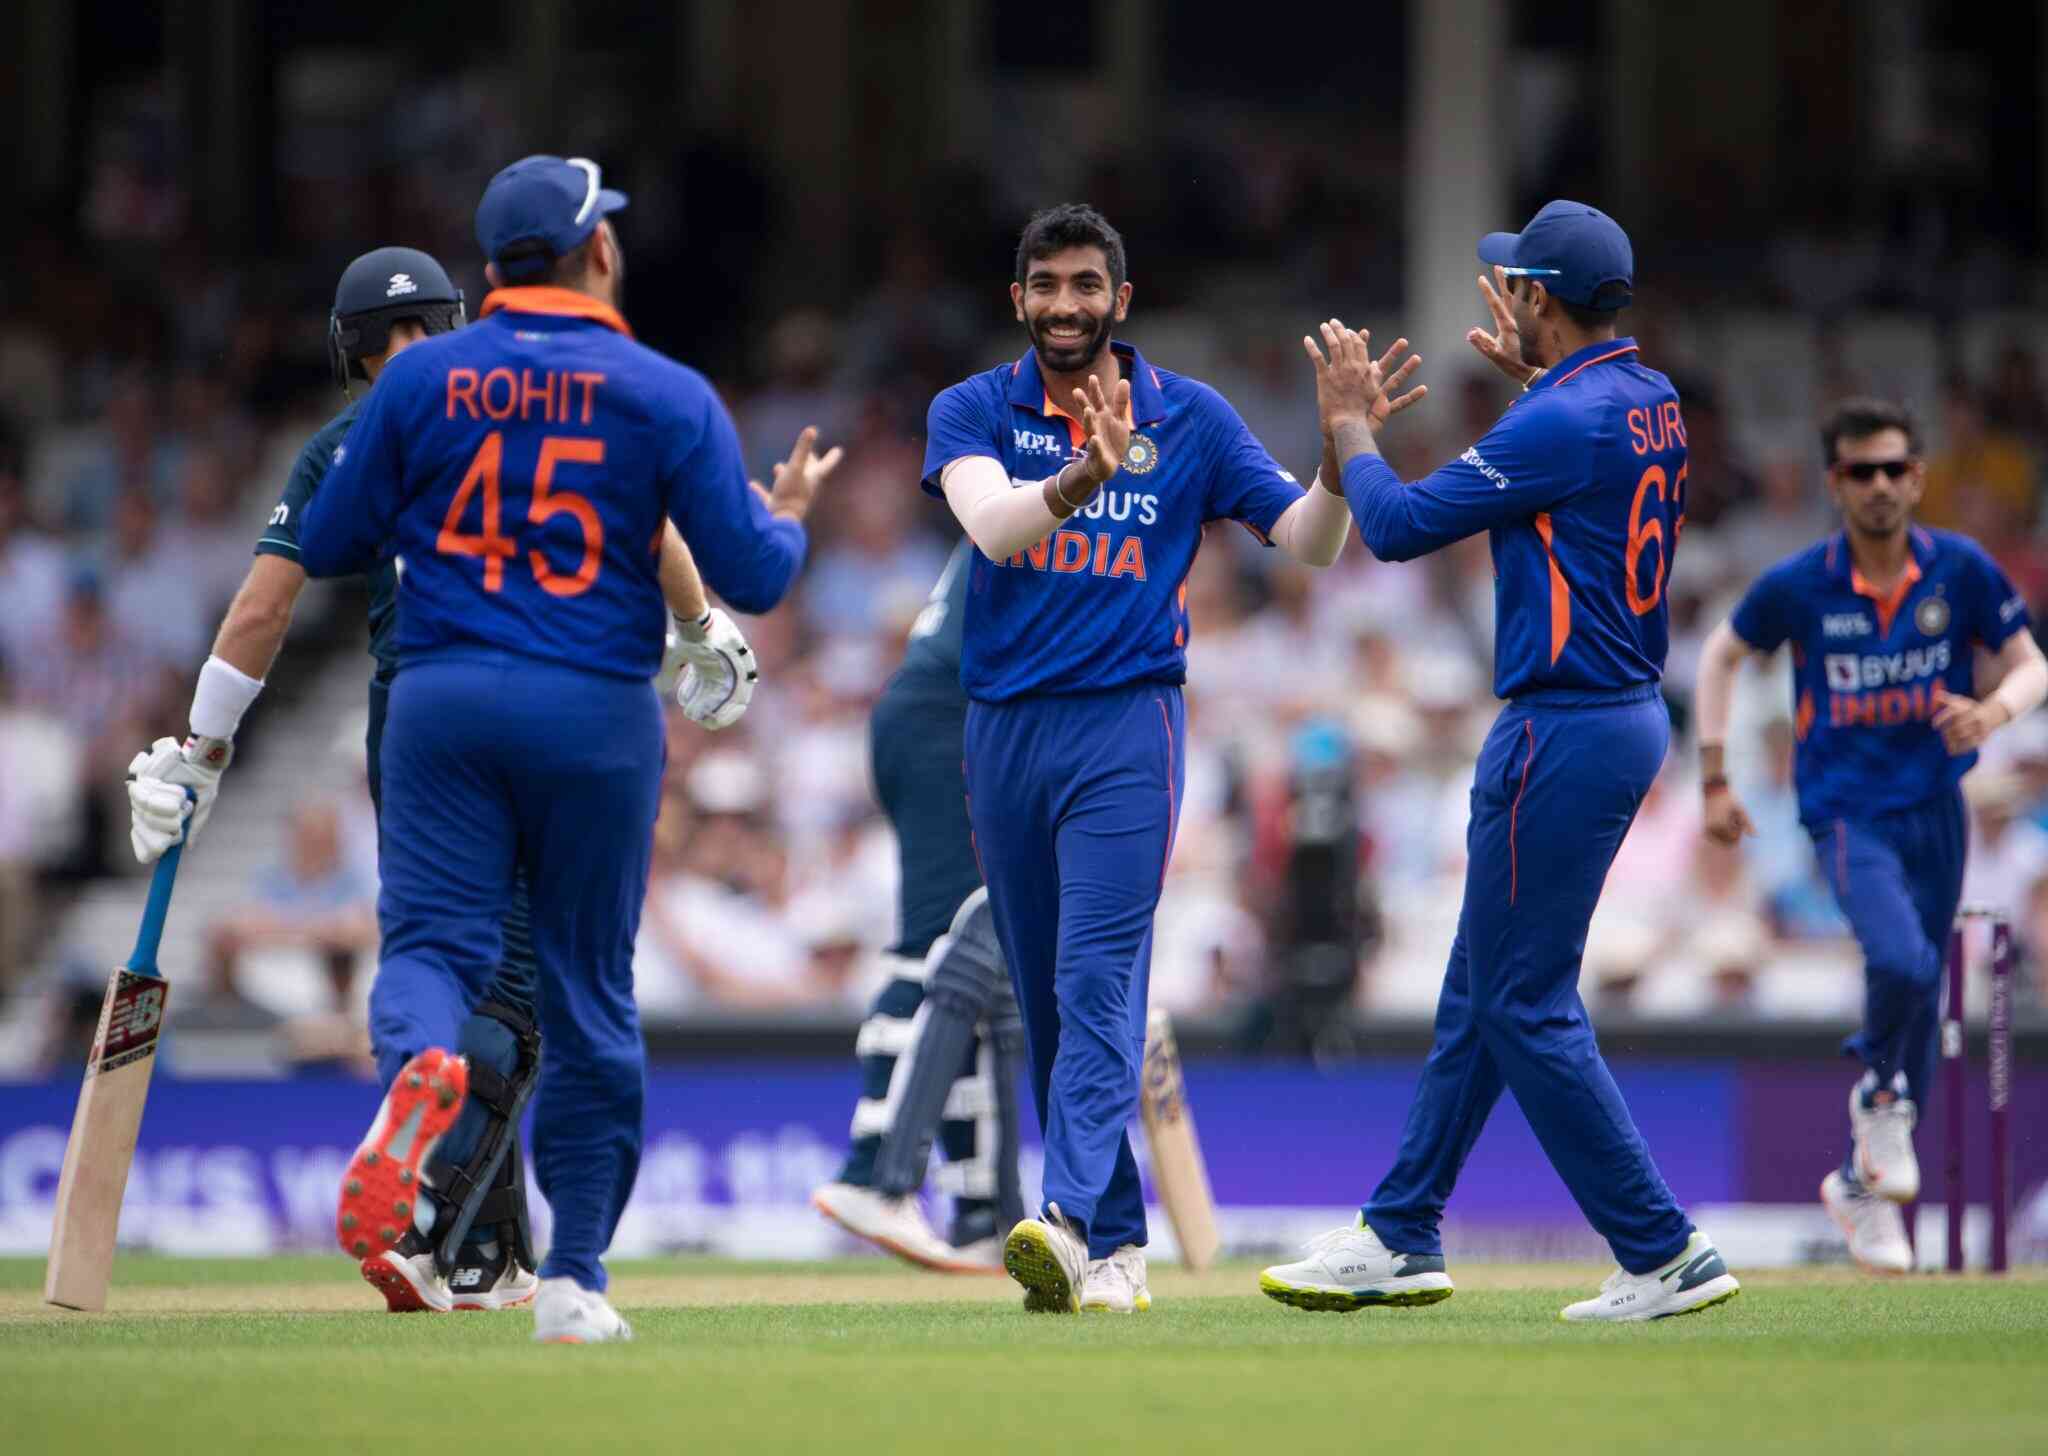 Jasprit Bumrah Set To Play for India Again?